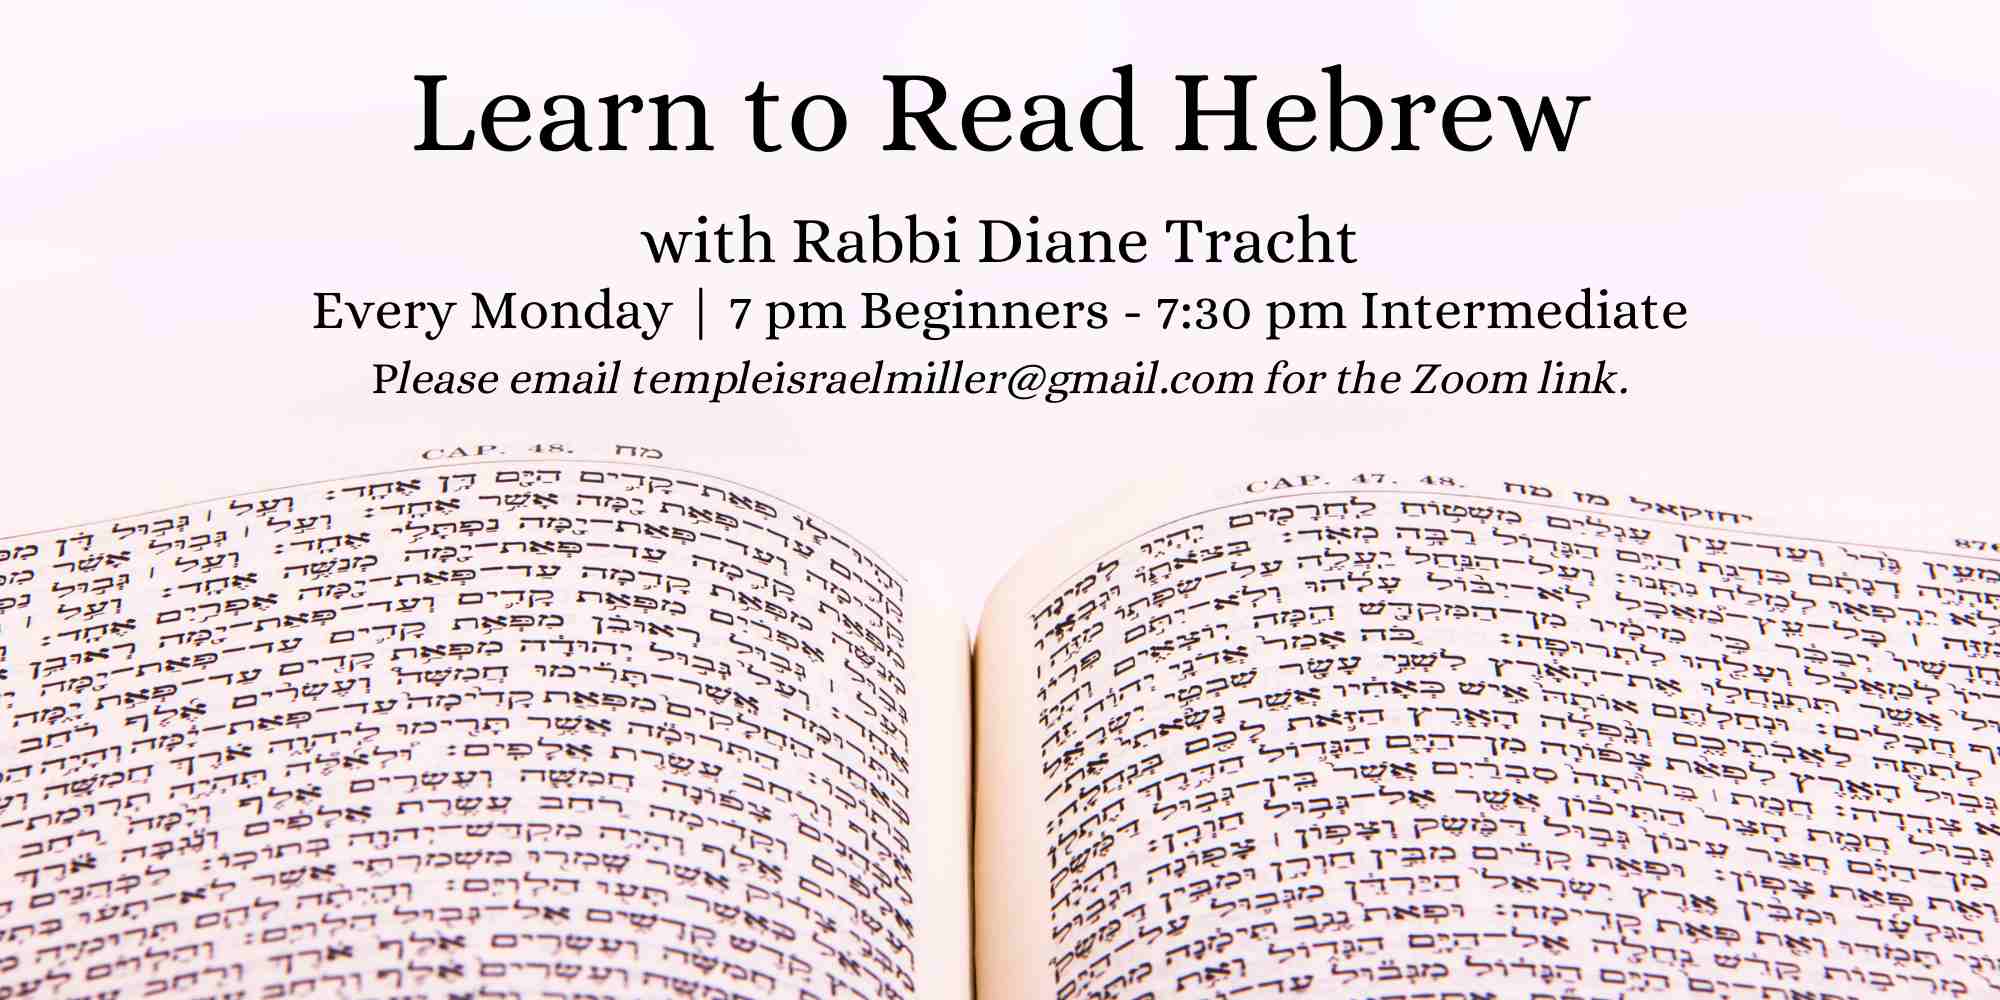 Learn to Read Hebrew Via Zoom